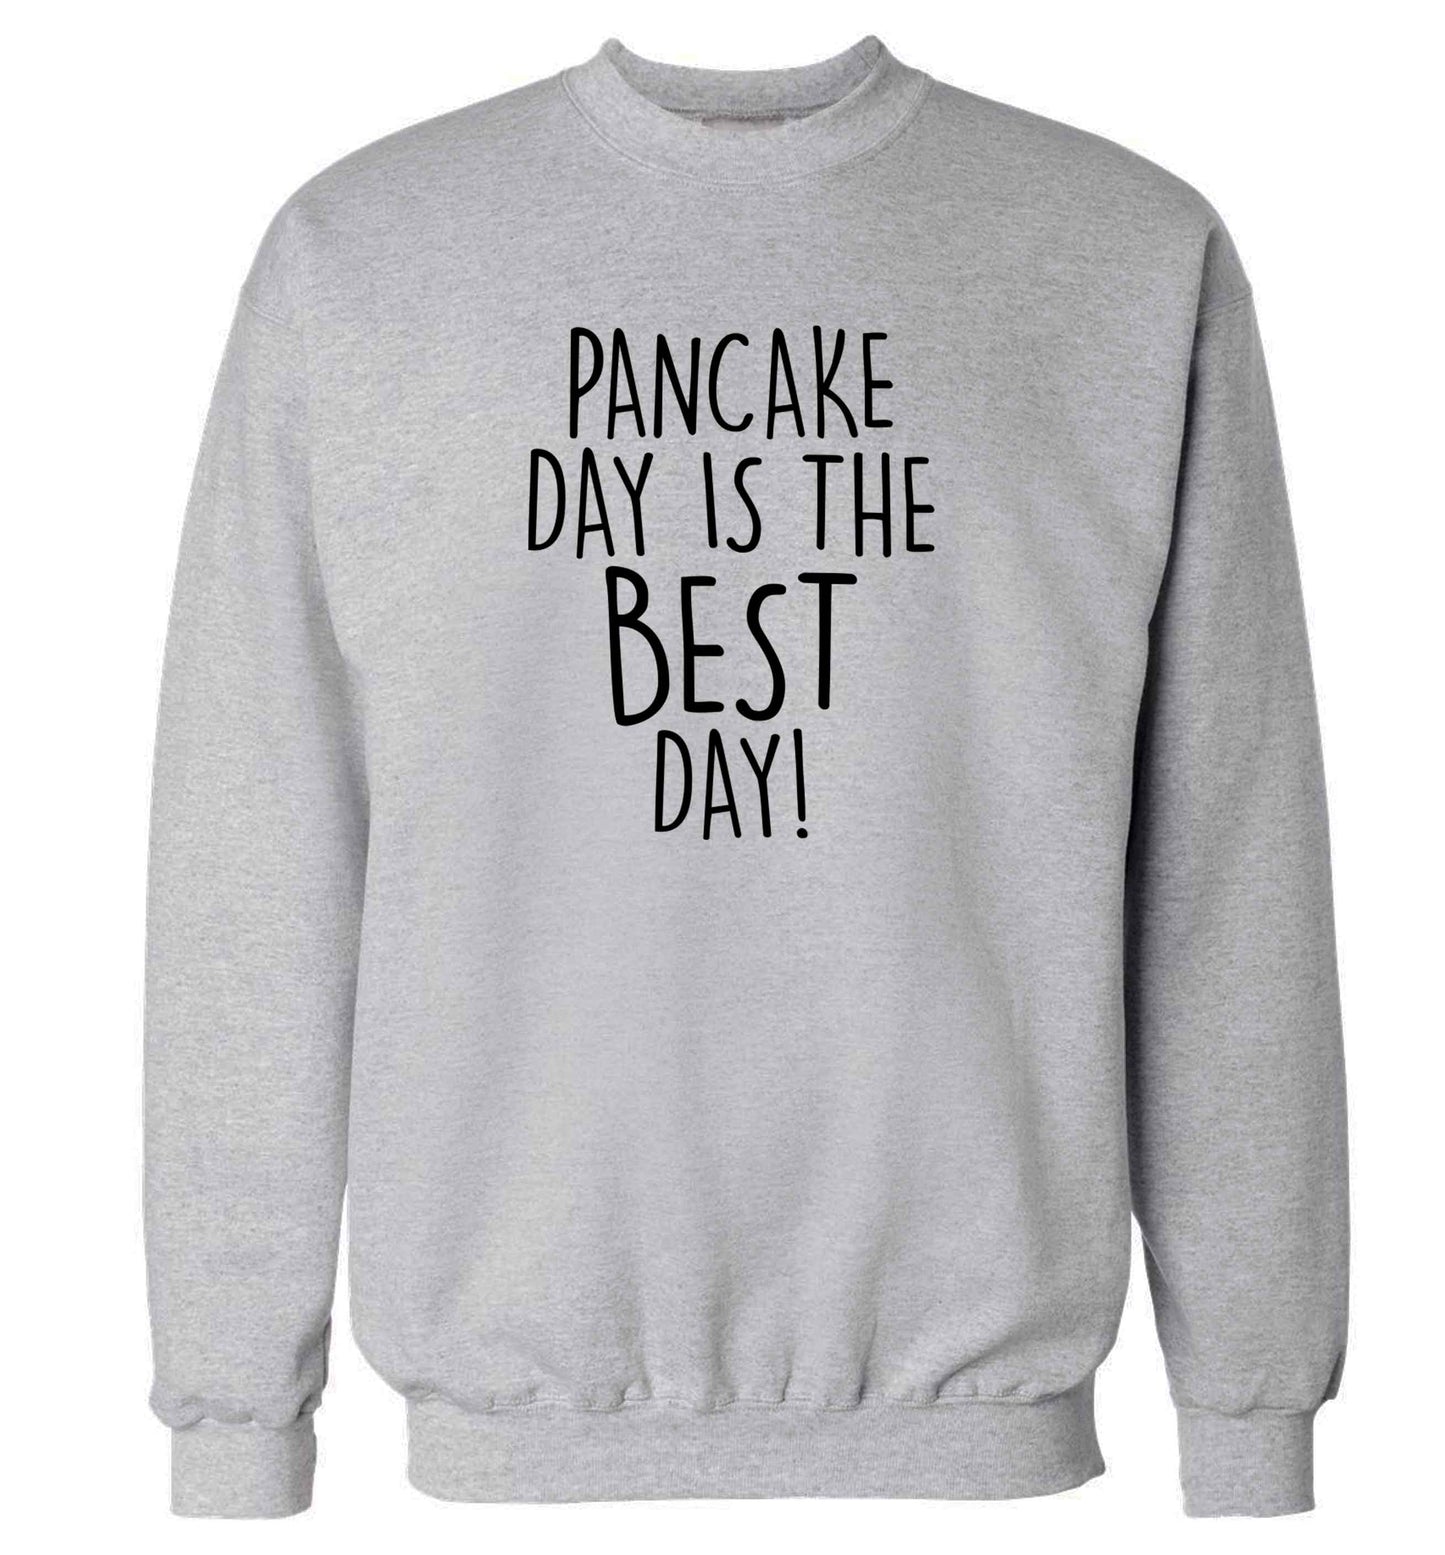 Pancake day is the best day adult's unisex grey sweater 2XL